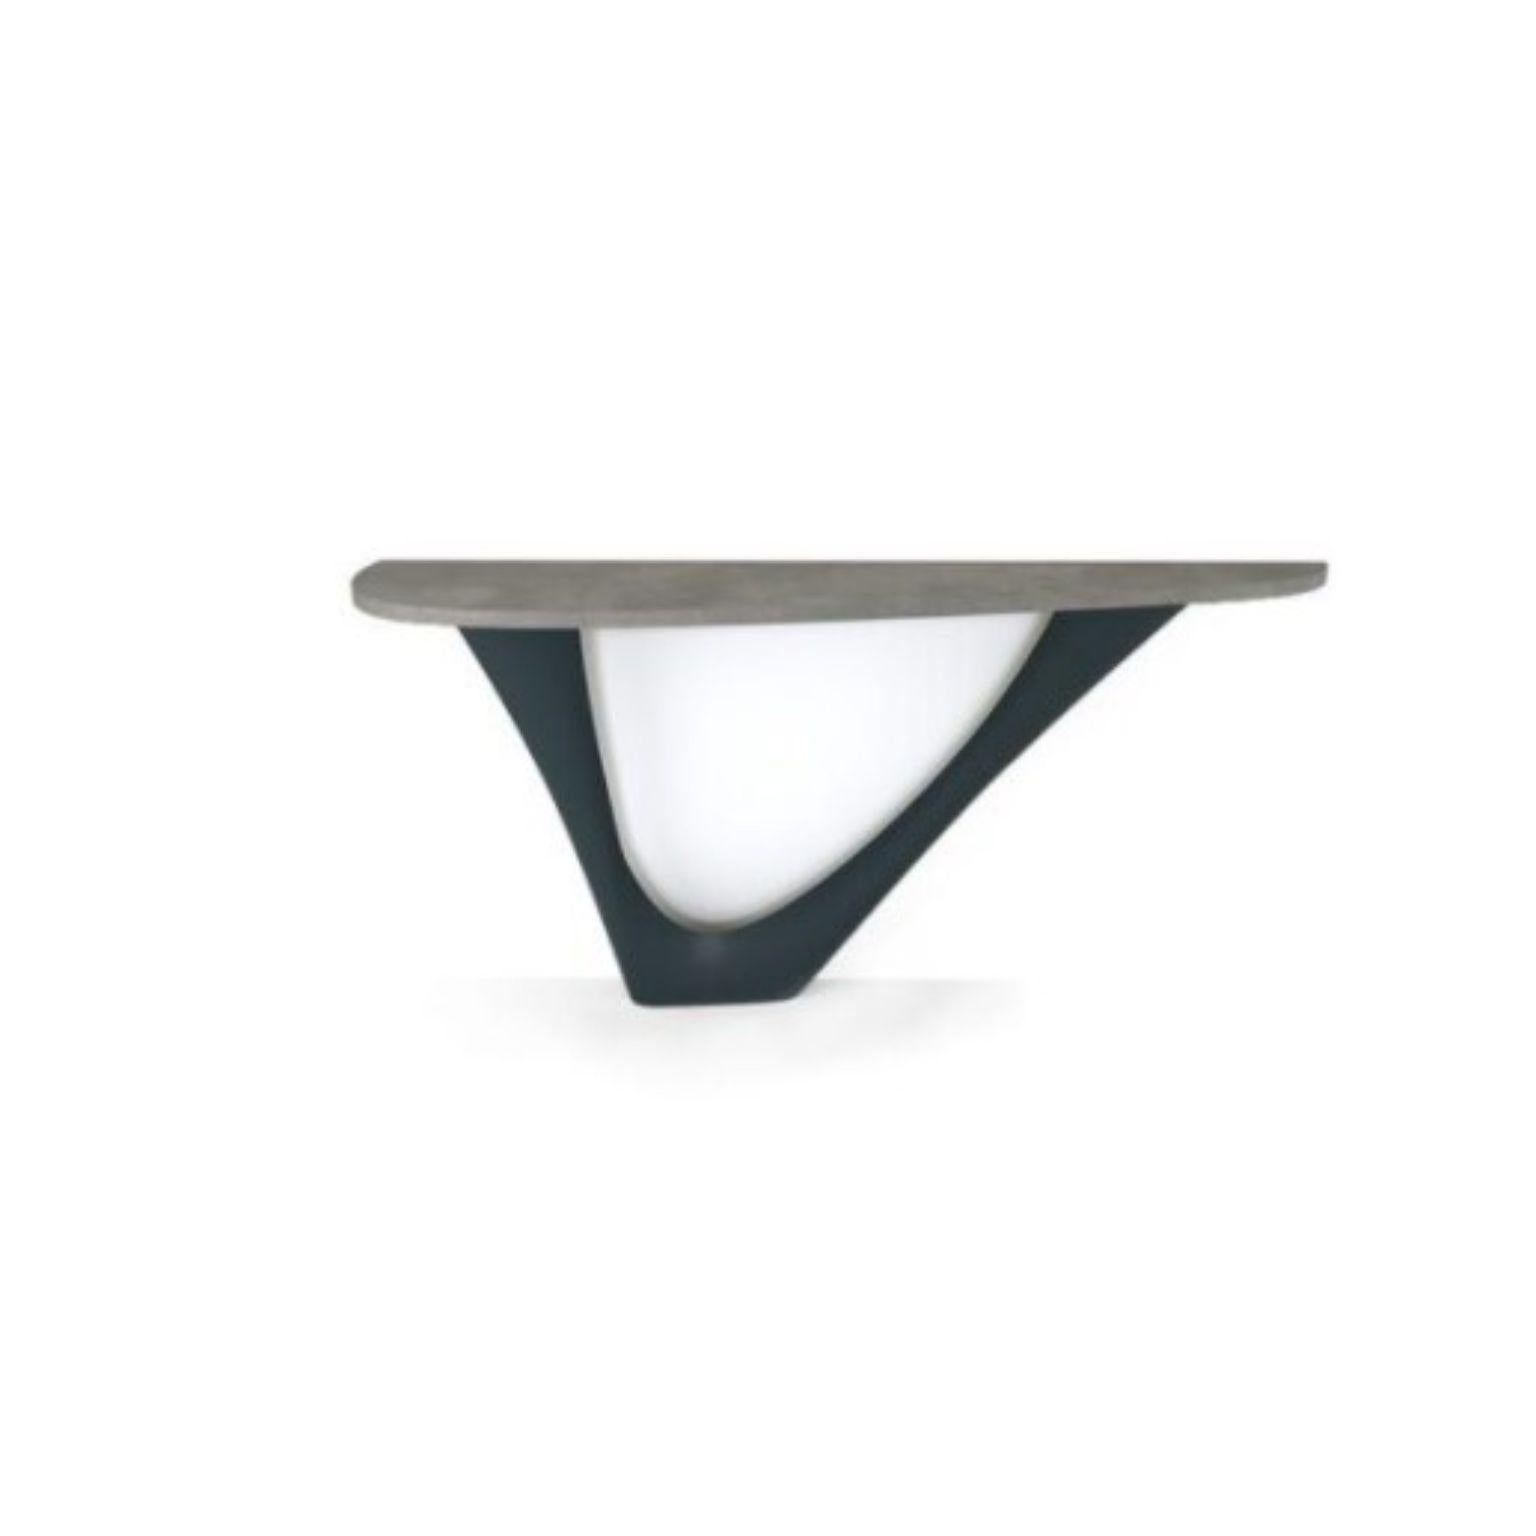 Grey blue G-Console mono steel base with concrete top by Zieta
Dimensions: D 43 x W 159 x H 75 cm 
Material: Concrete, carbon steel.
Also available in different colors and dimensions.

G-Console is another bionic object in our collection. Created